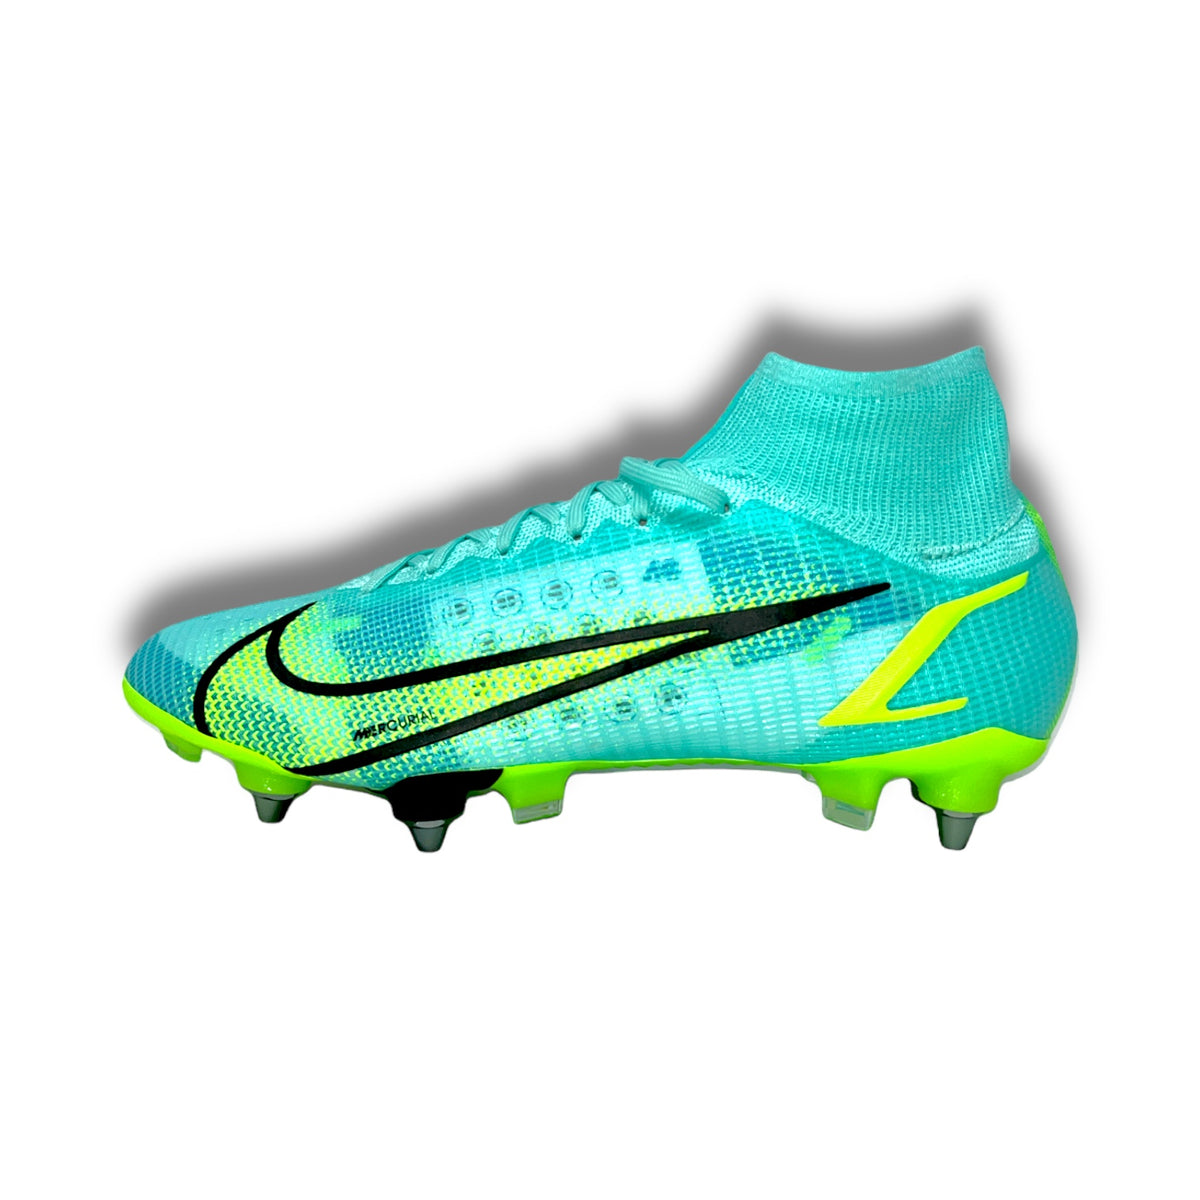 Nike Mercurial Superfly 8 Elite SG-Pro turquoise